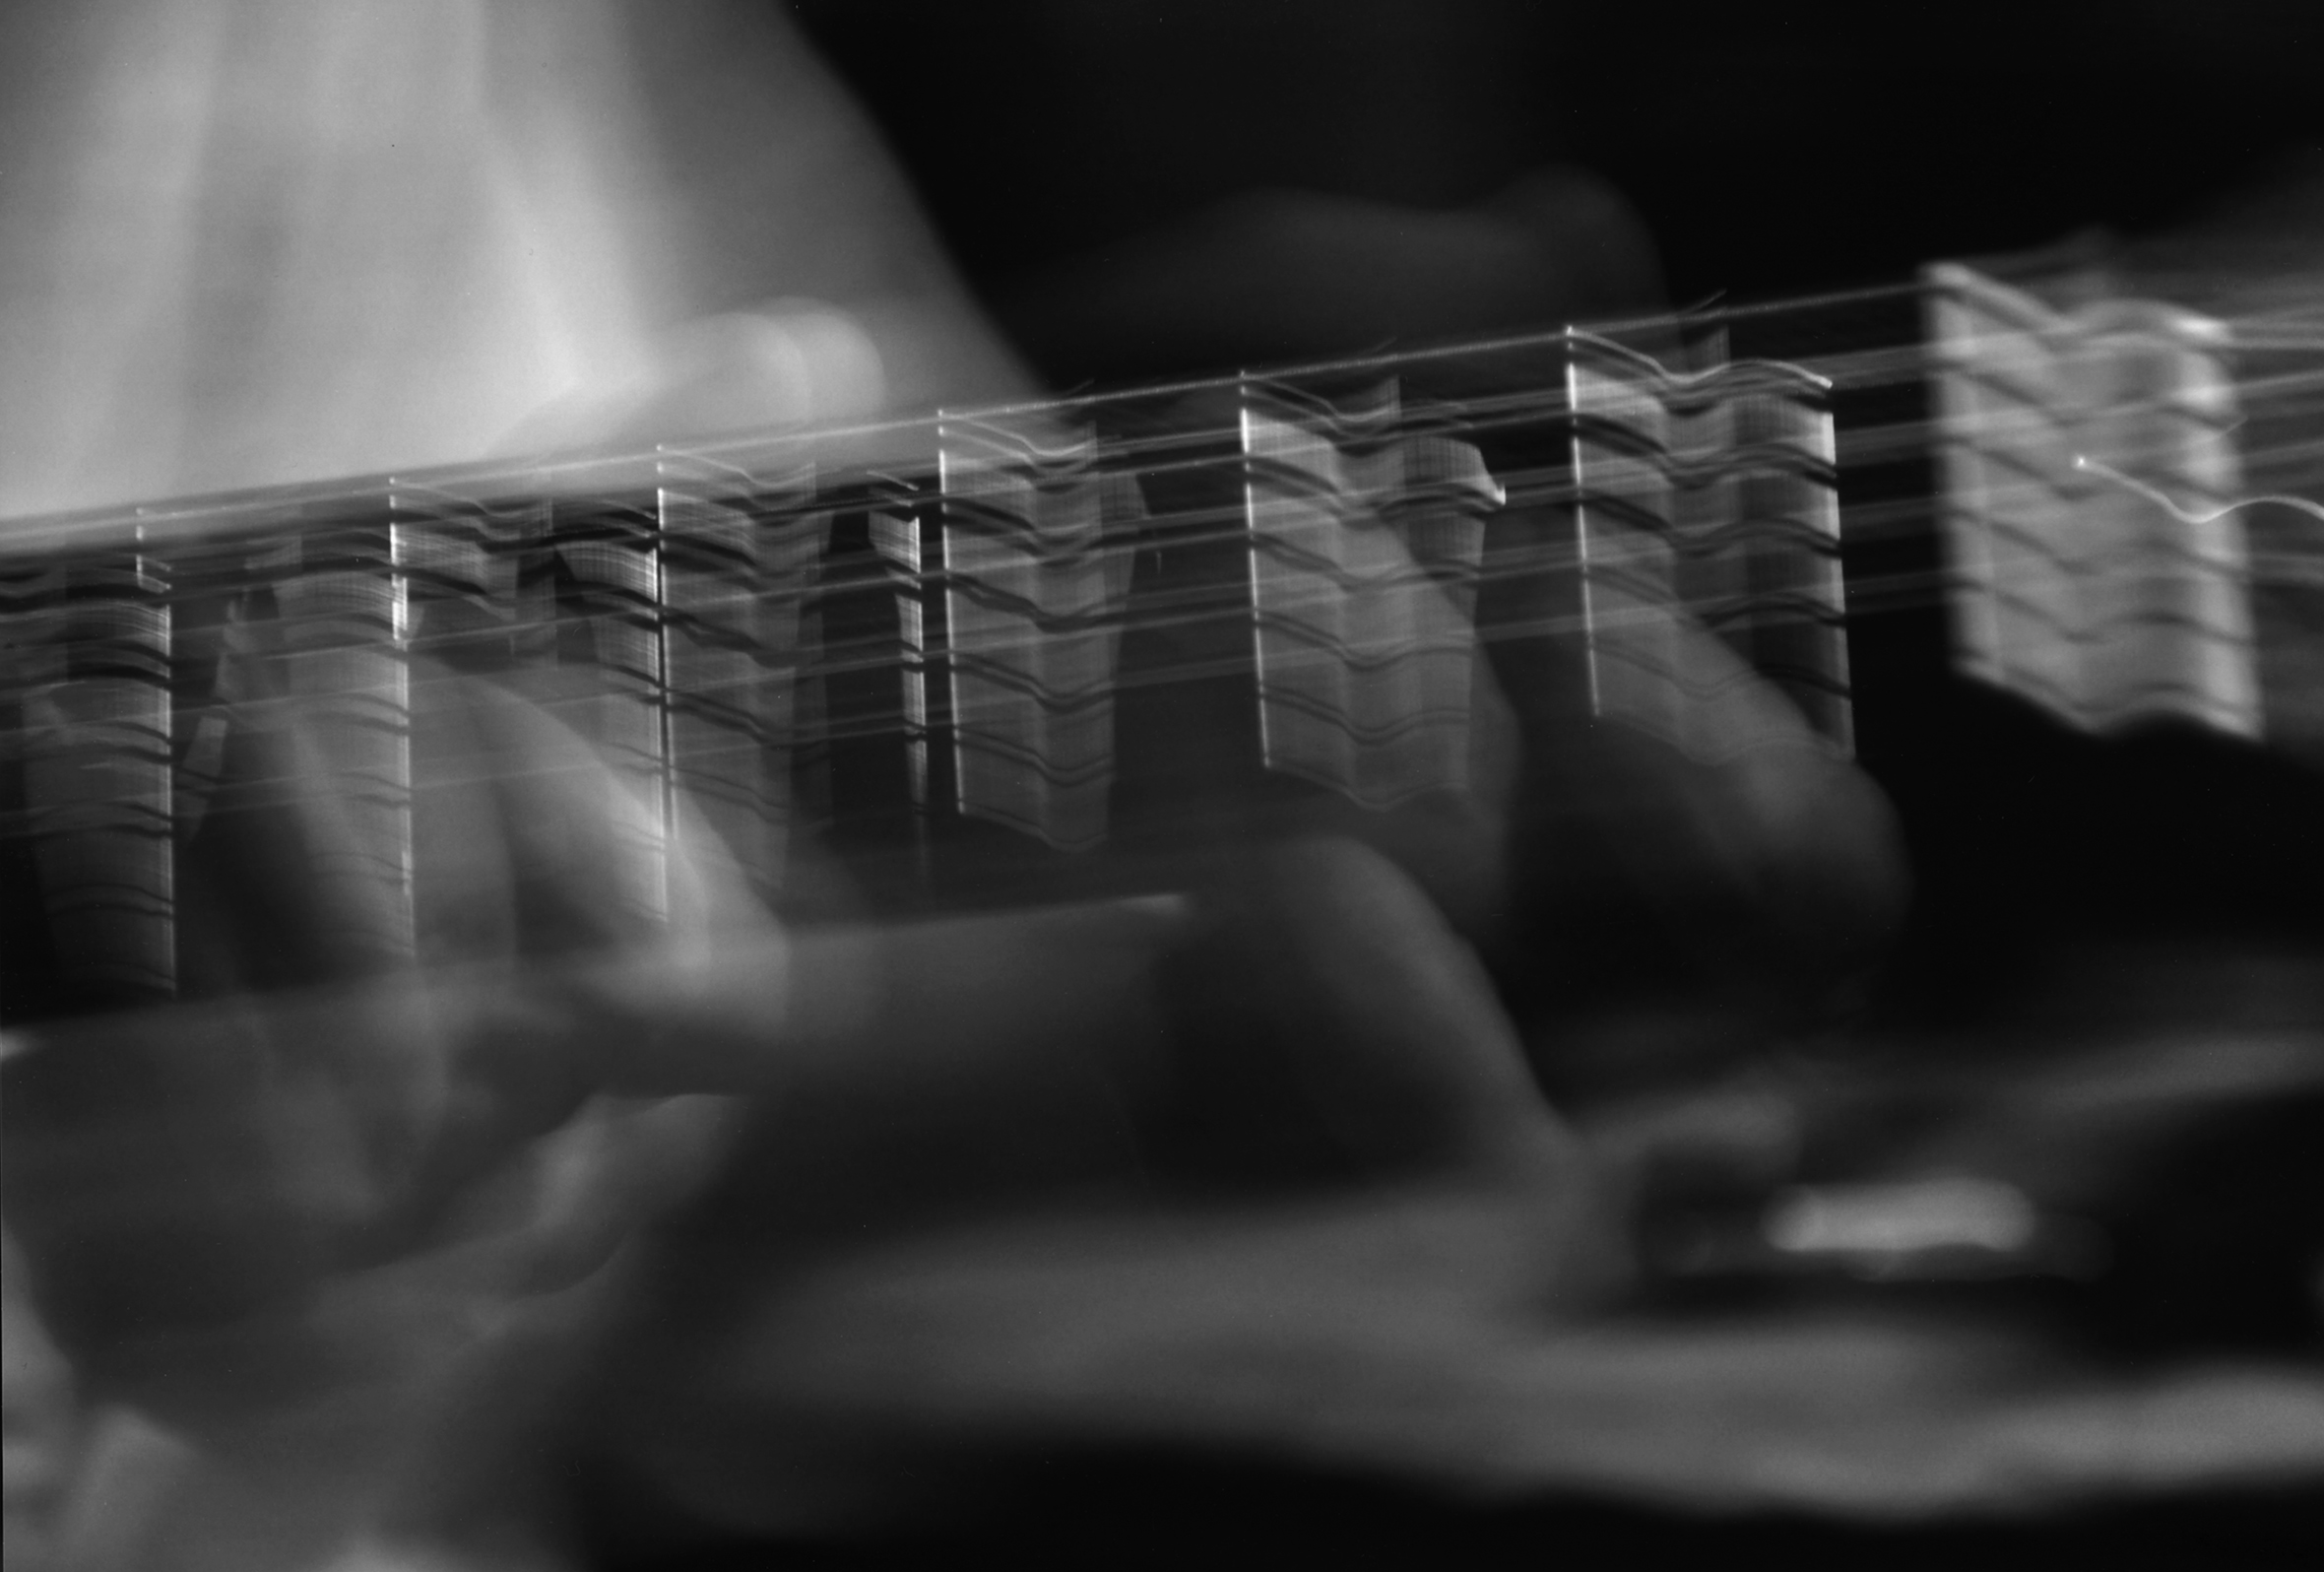 Hands play the strings on the neck of a guitar. The image has been filtered and blurred so it looks like you can see the movement of the fingers and hands while playing.